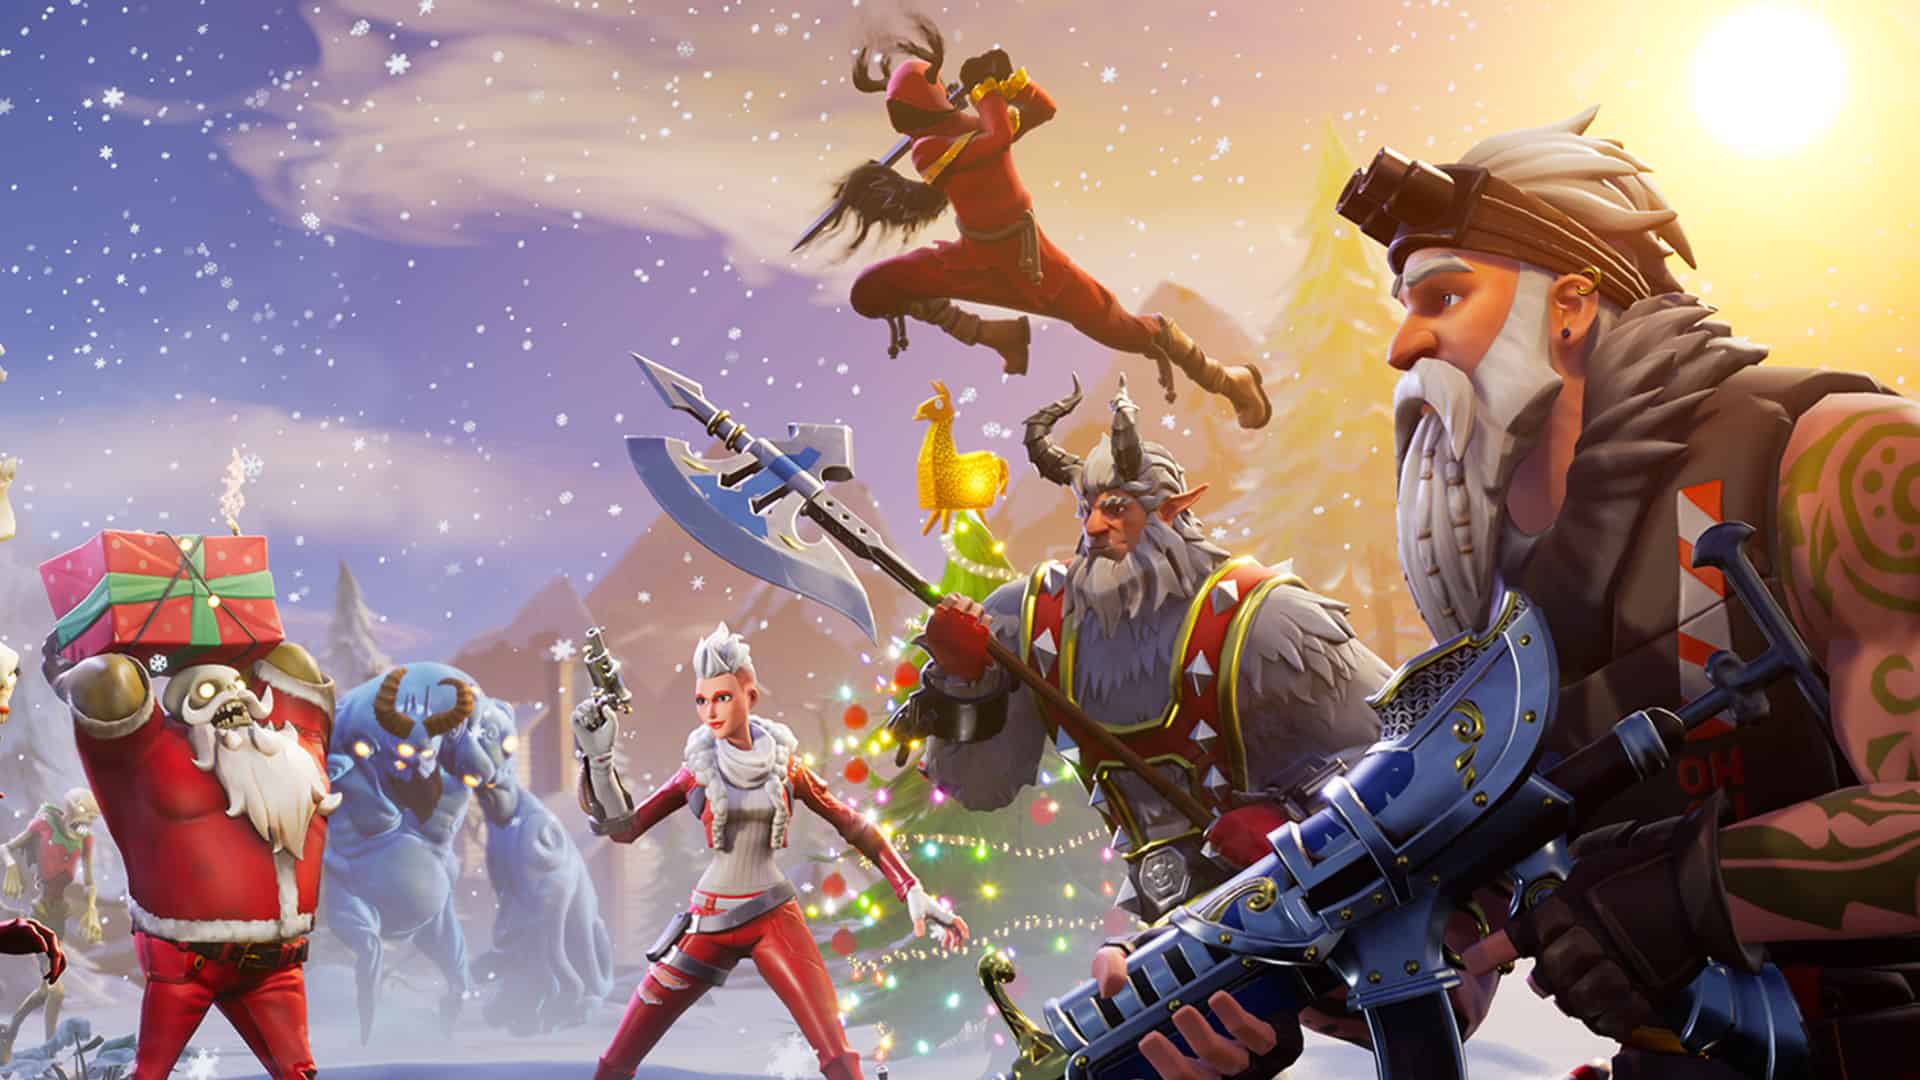 Fortnite Save The World Winter Event Fortnite Patch V7 10 Features Epic Winter Themed Festivities